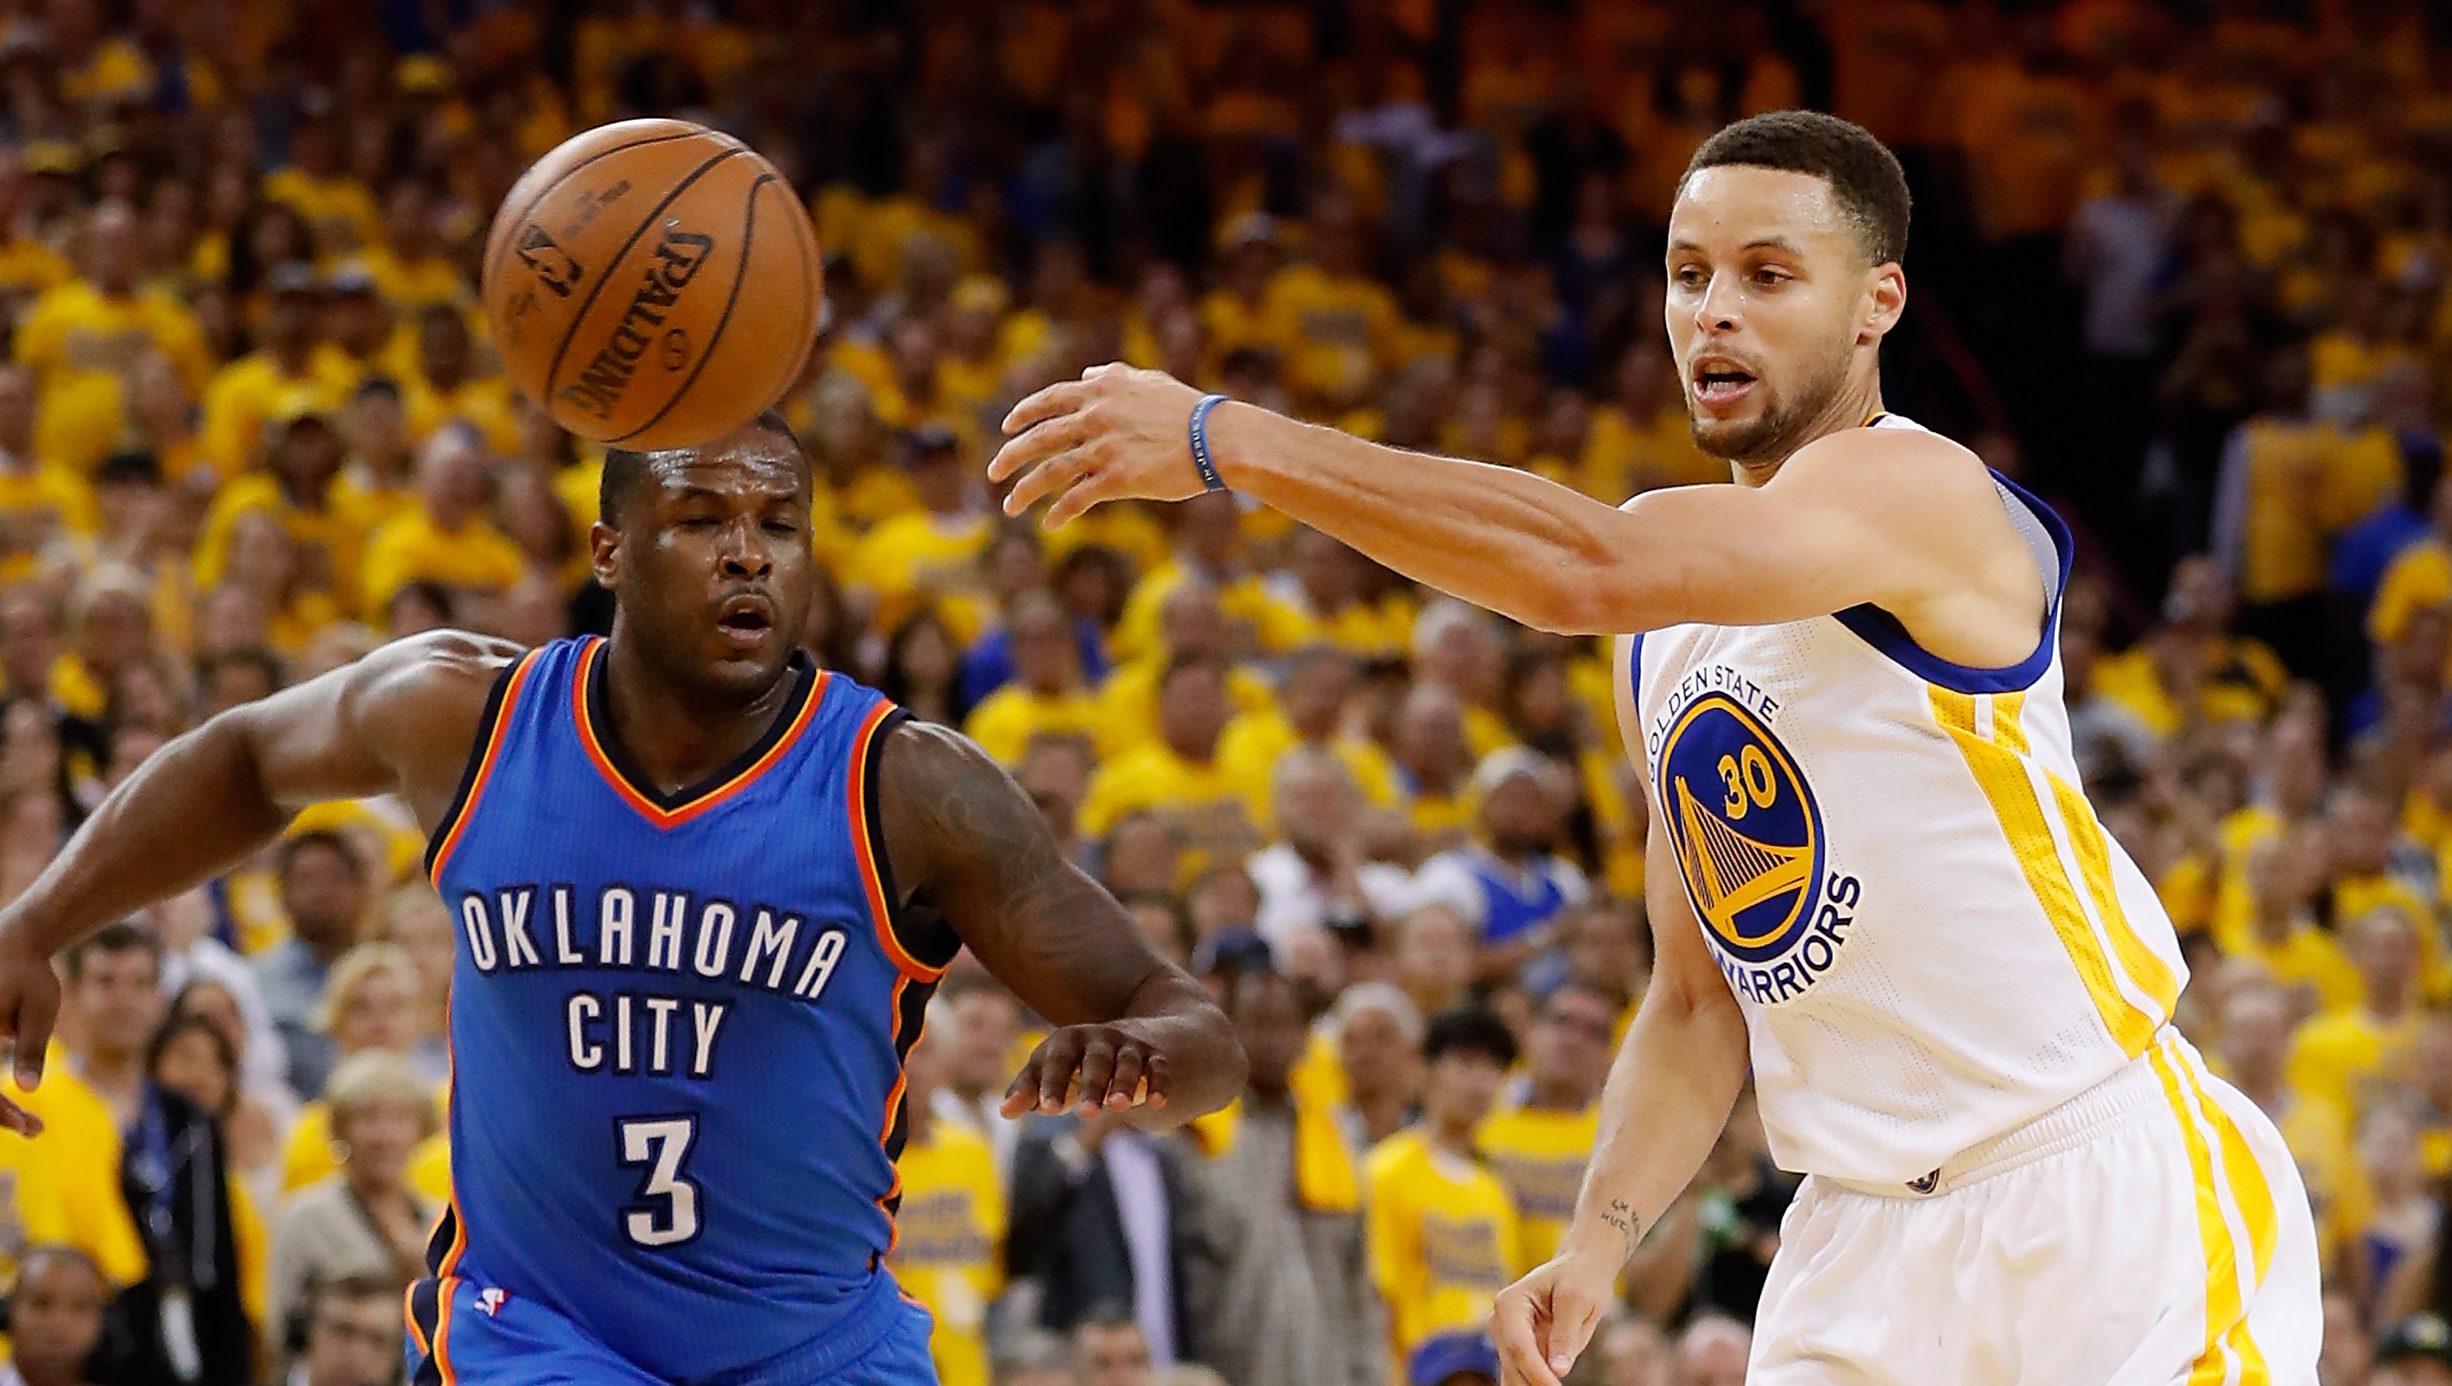 Warriors vs. Thunder Live Stream How to Watch Game 2 for Free